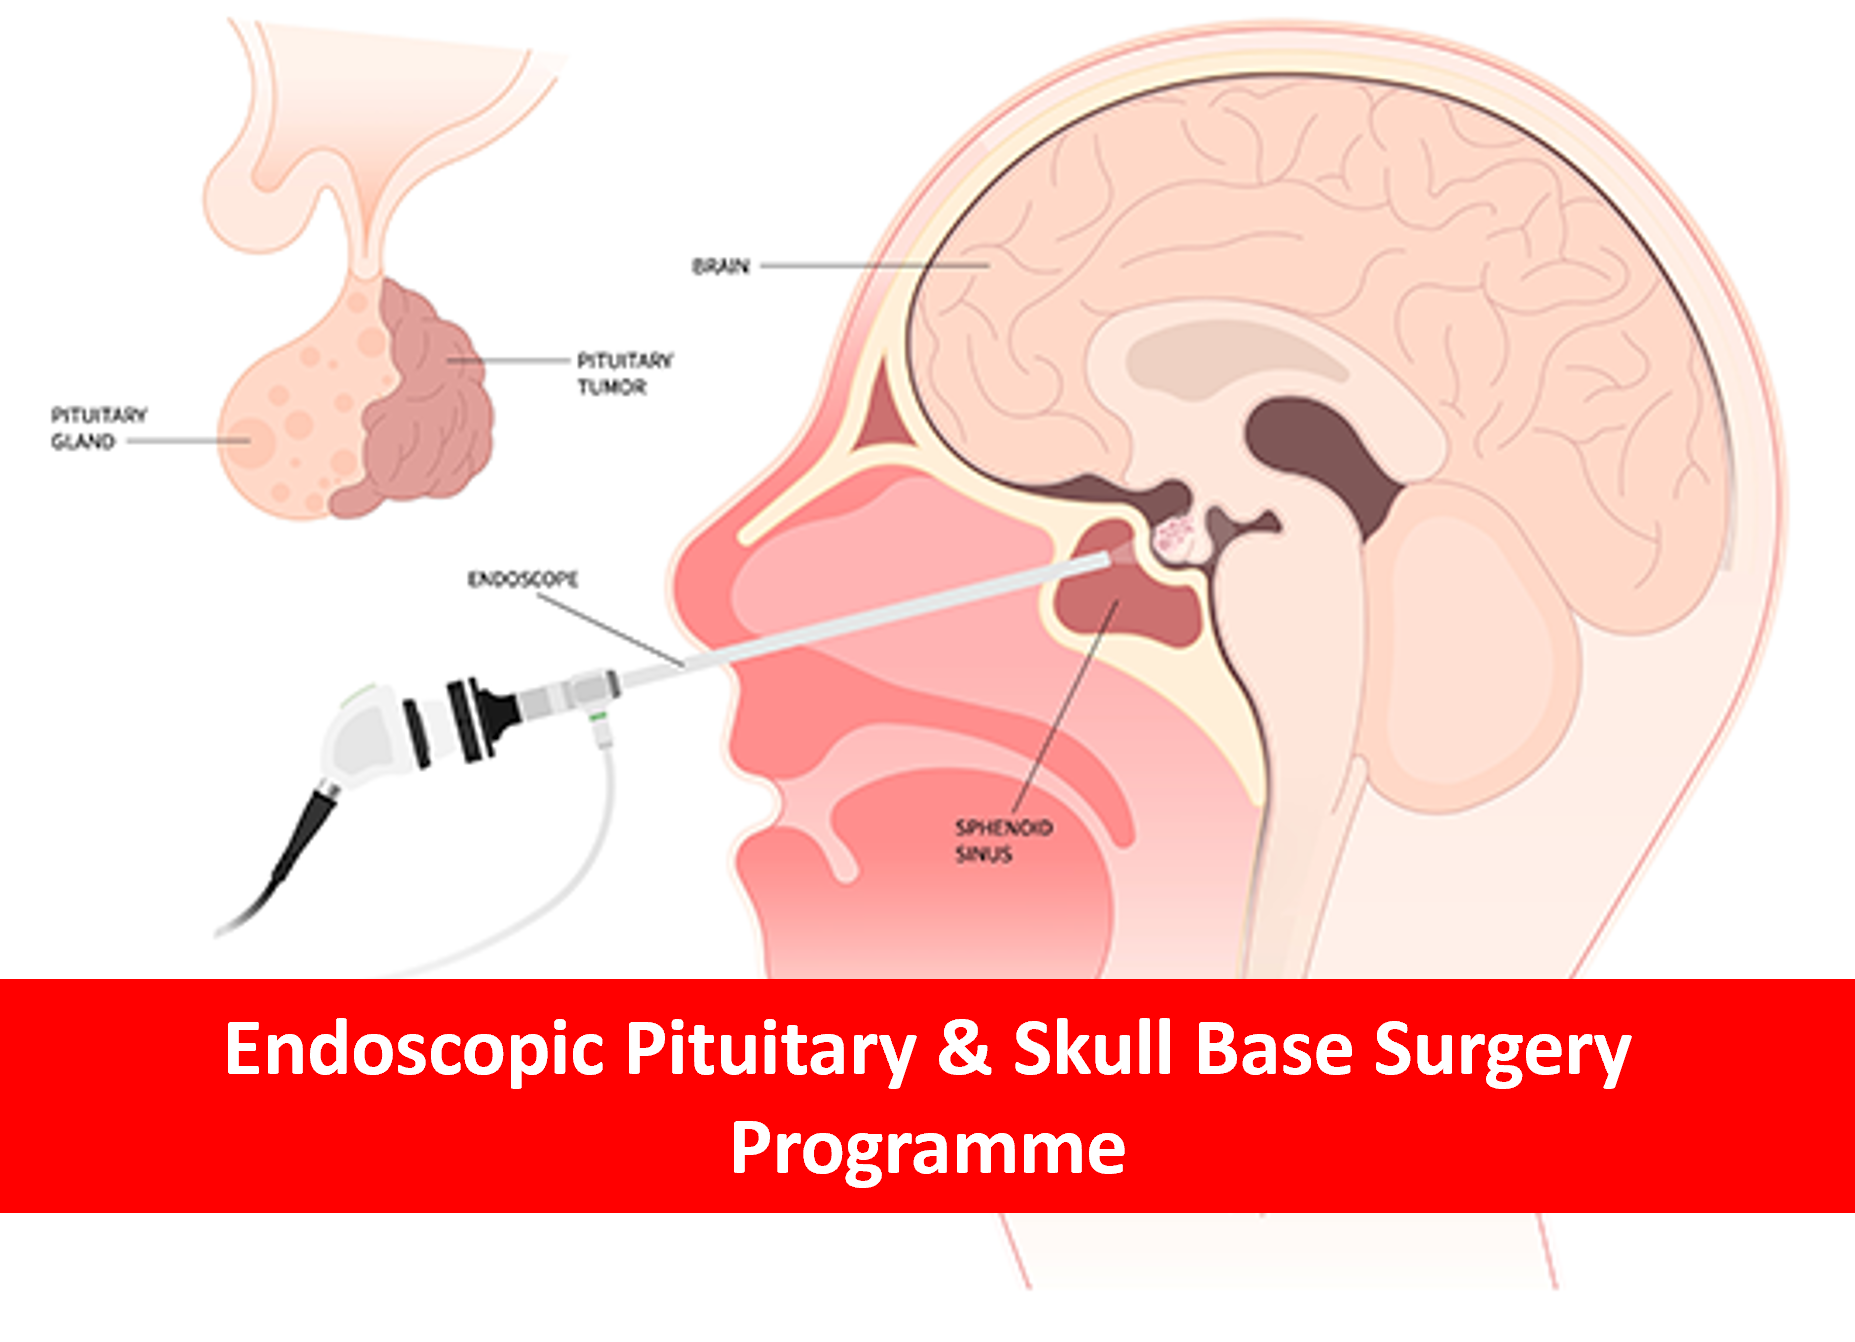 Endoscopic Pituitary and Skull Base Surgery Programme